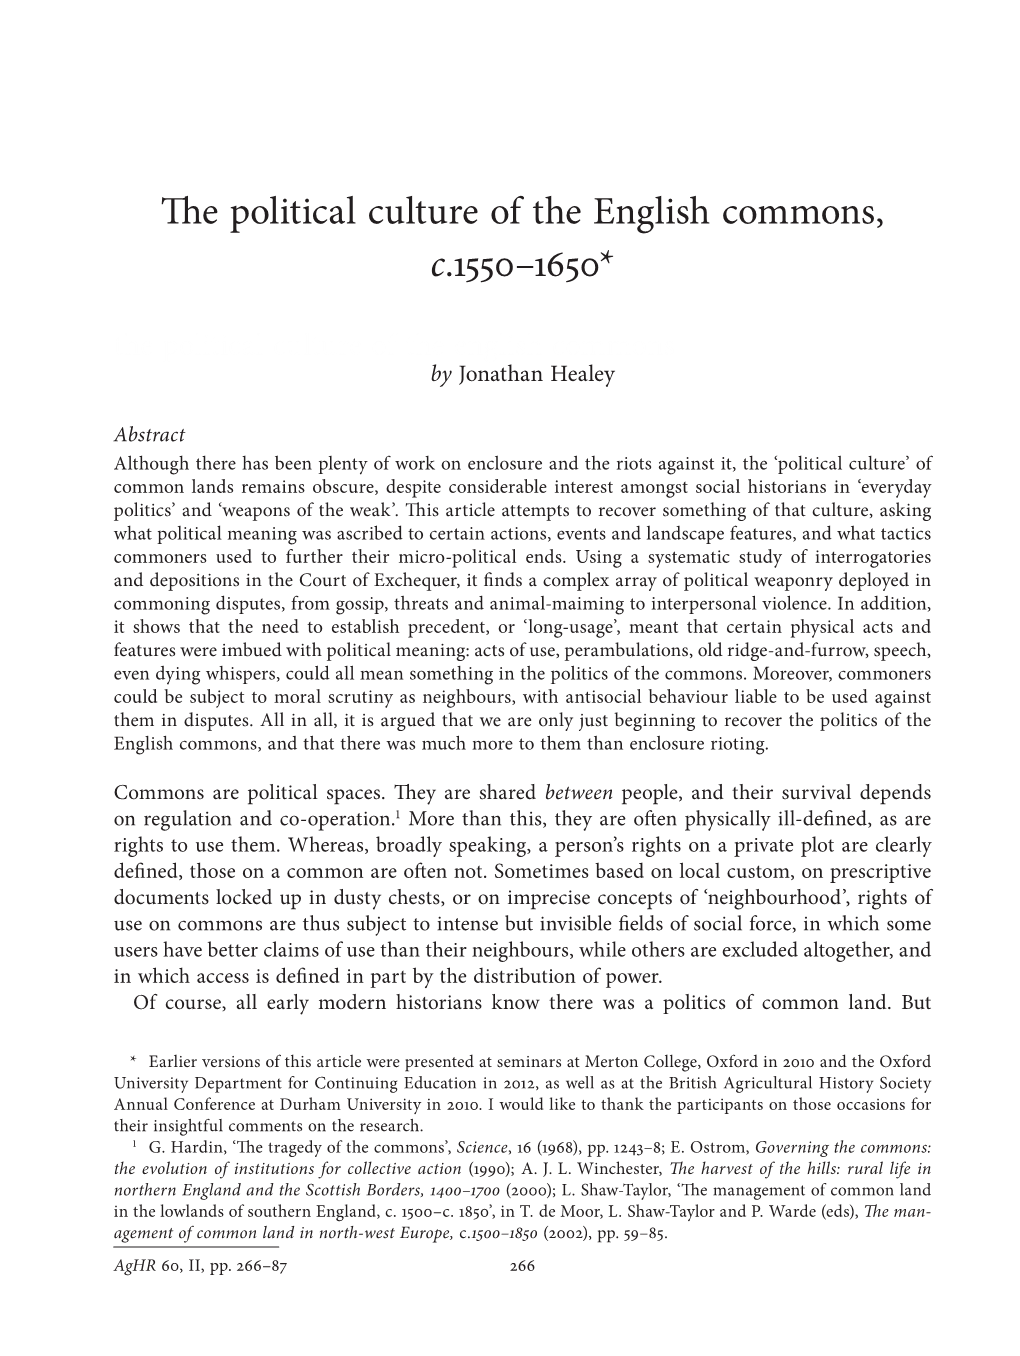 The Political Culture of the English Commons, C.1550–1650* the Political Culture of the English Commons by Jonathan Healey